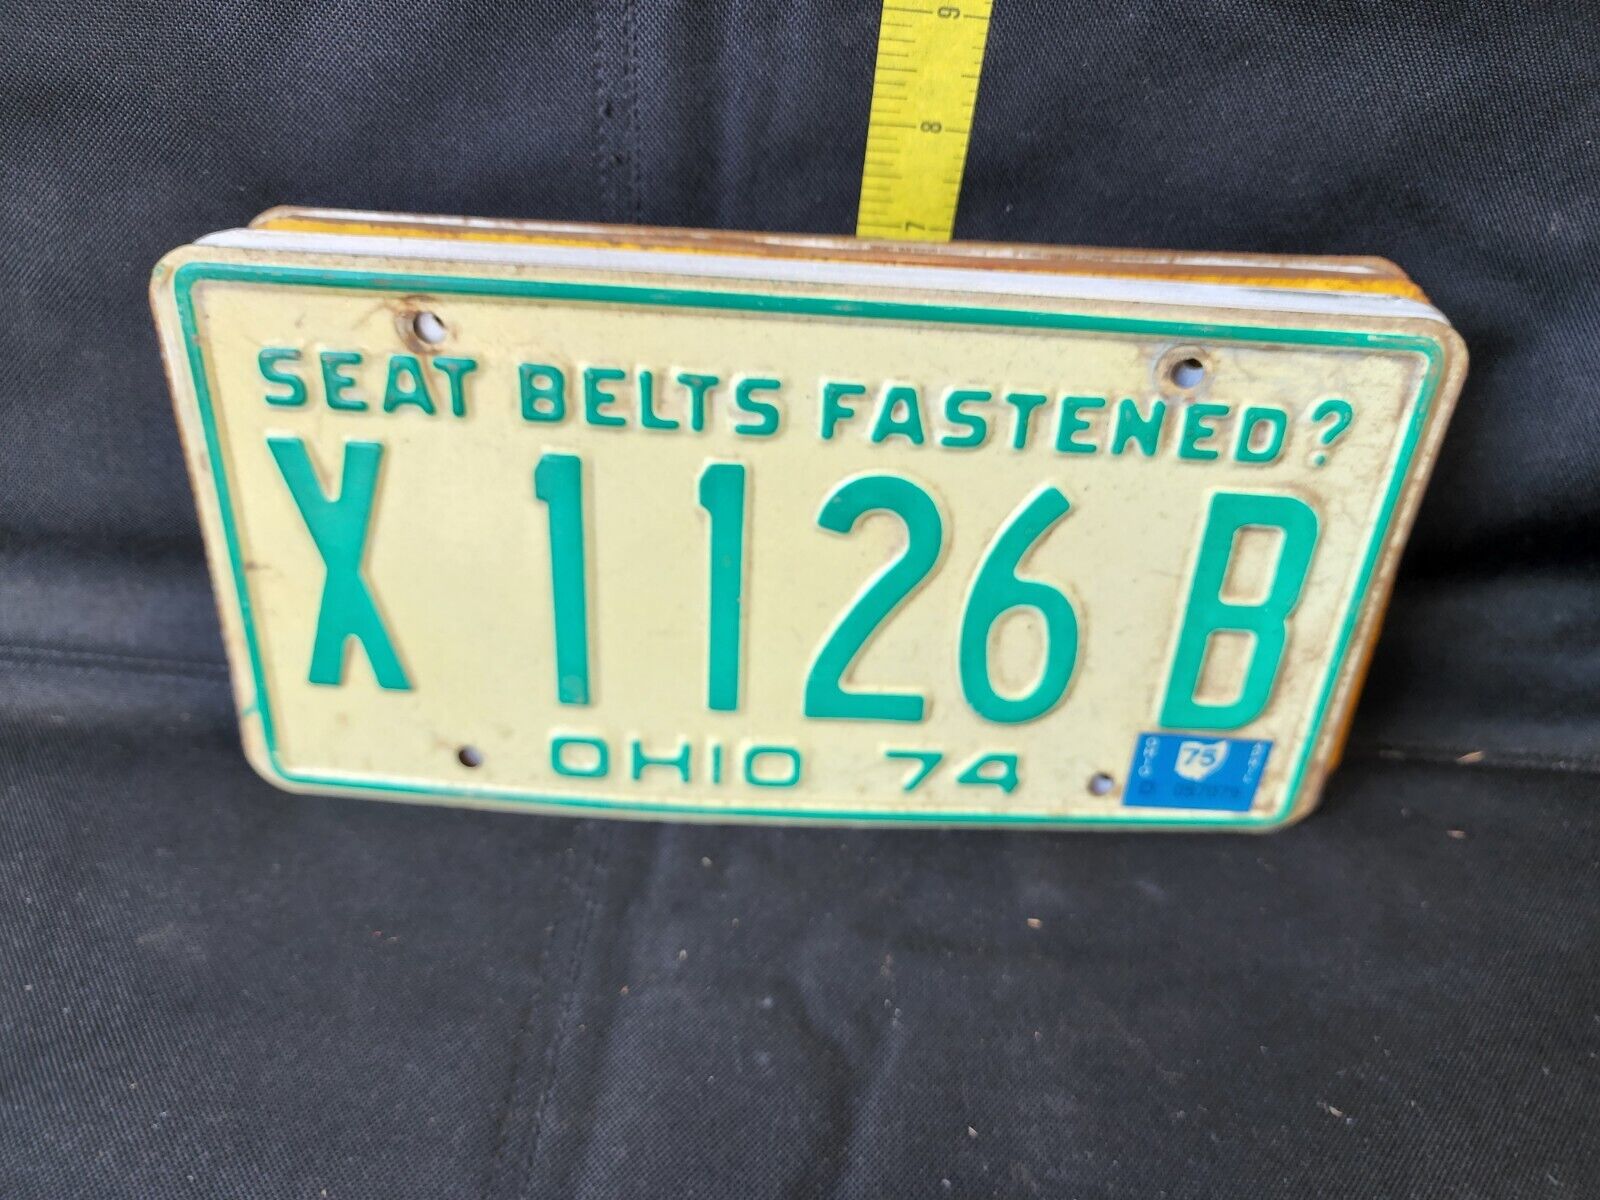 Vintage 1974 Ohio License Plate Seat Belts Fastened? #X 1126 B